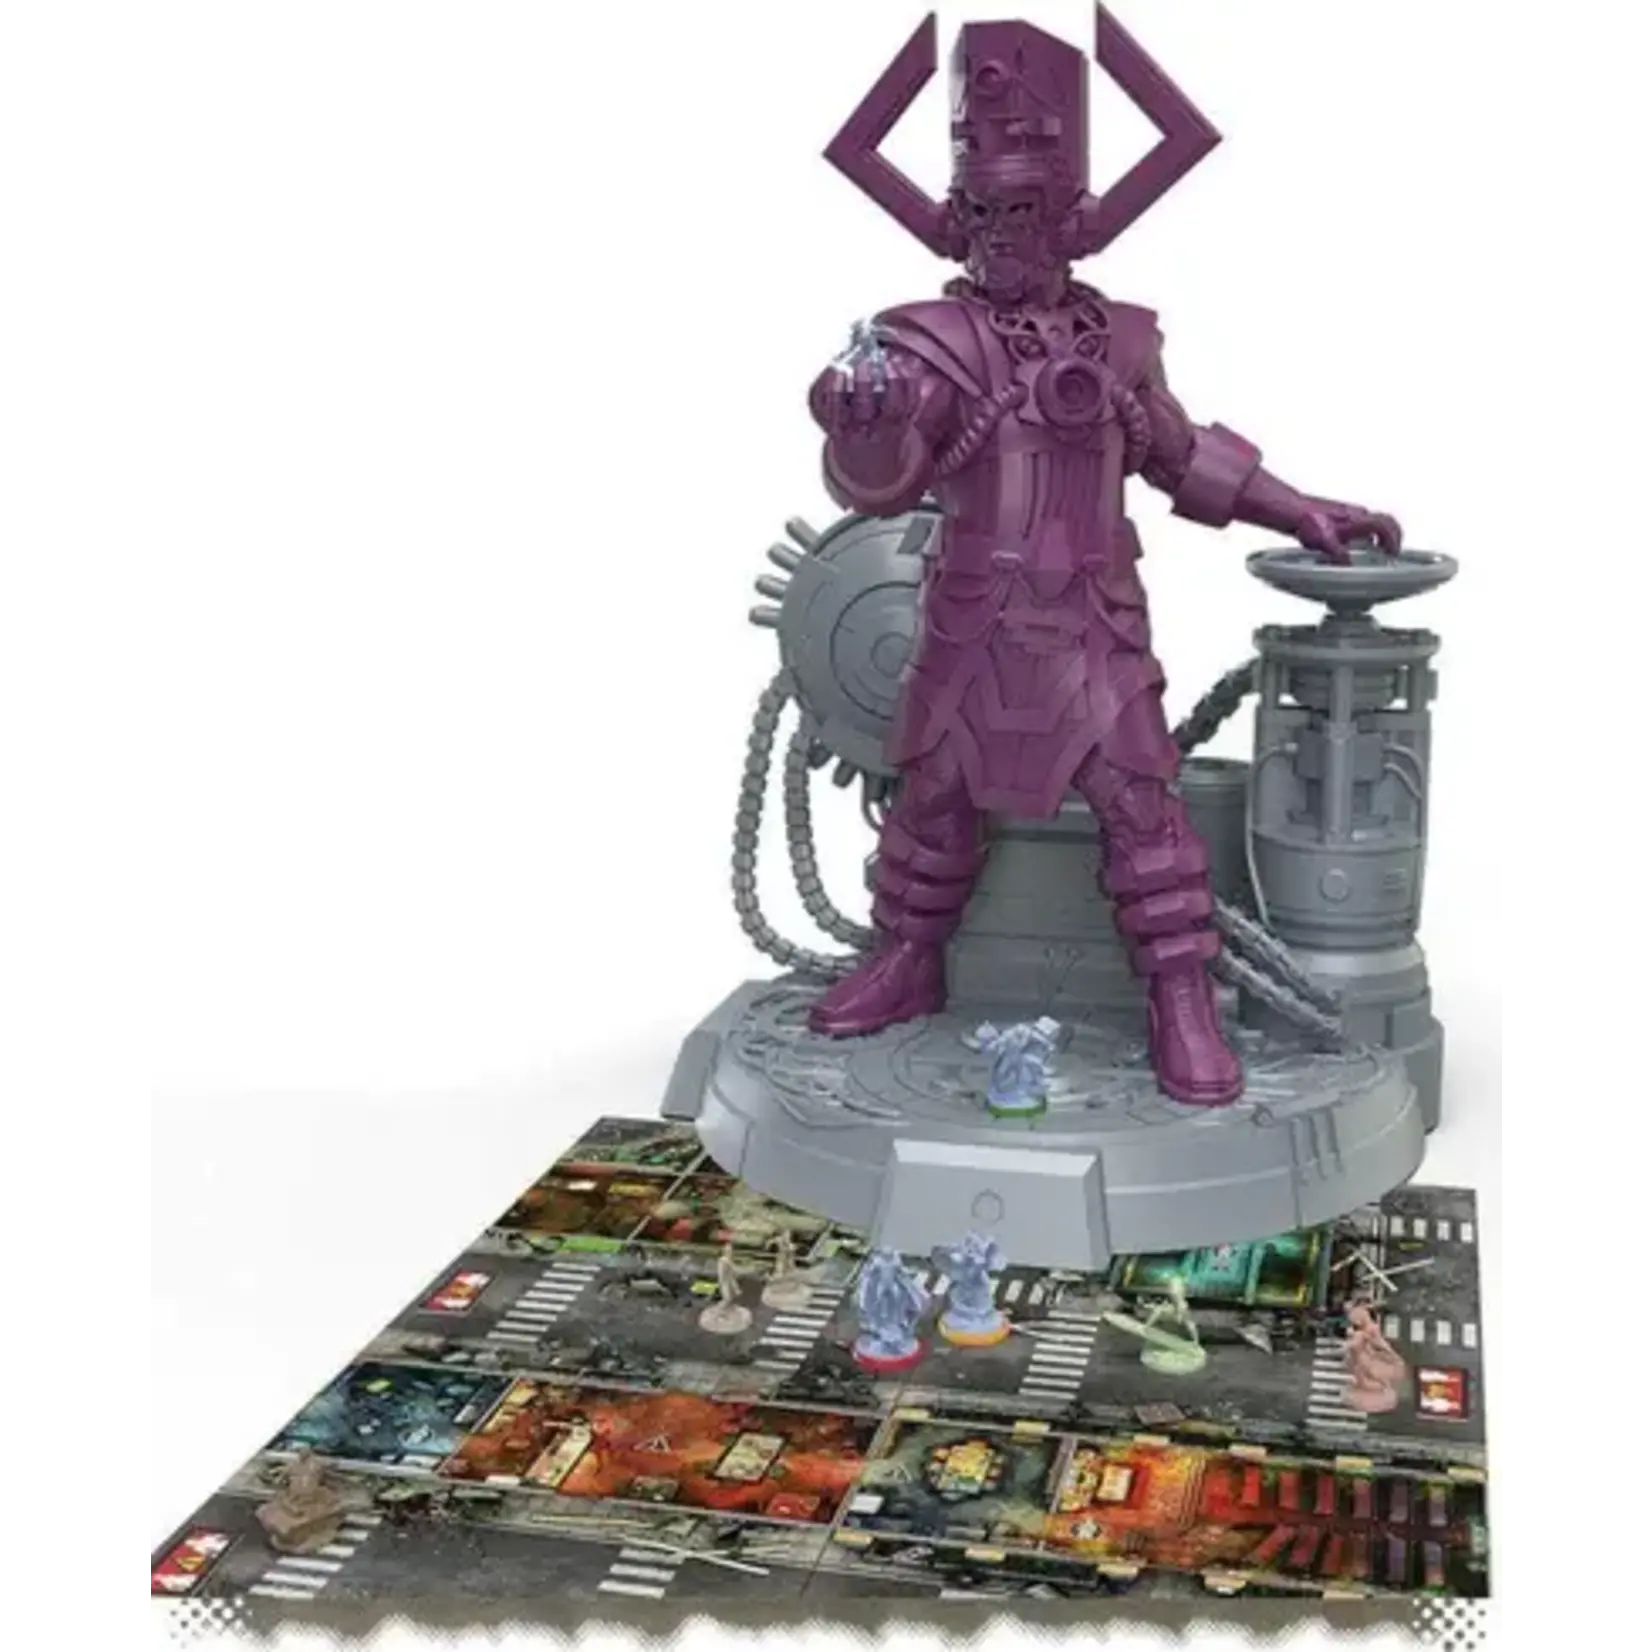 Cool Mini or Not Marvel Zombies: Galactus the Devourer